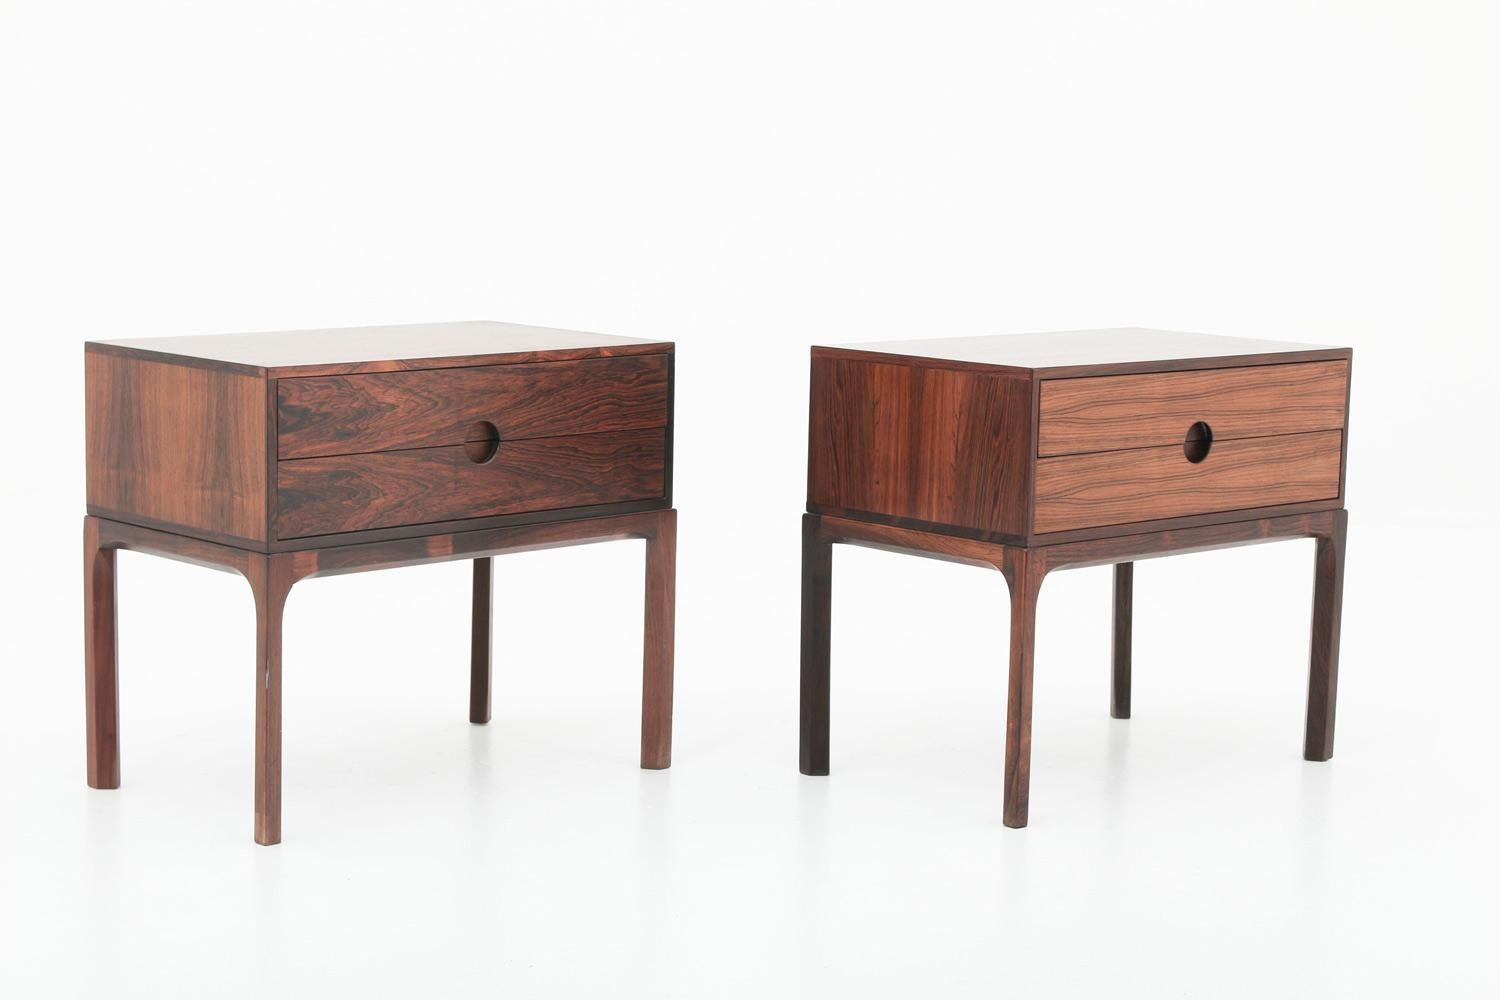 A pair of bedside tables in rosewood by Kai Kristiansen for Aksel Kjersgaard, Denmark, 1960s.
Beautiful bedside tables with great details, such as the round integrated handle on the drawers. 
Condition: Very good original condition. The drawers